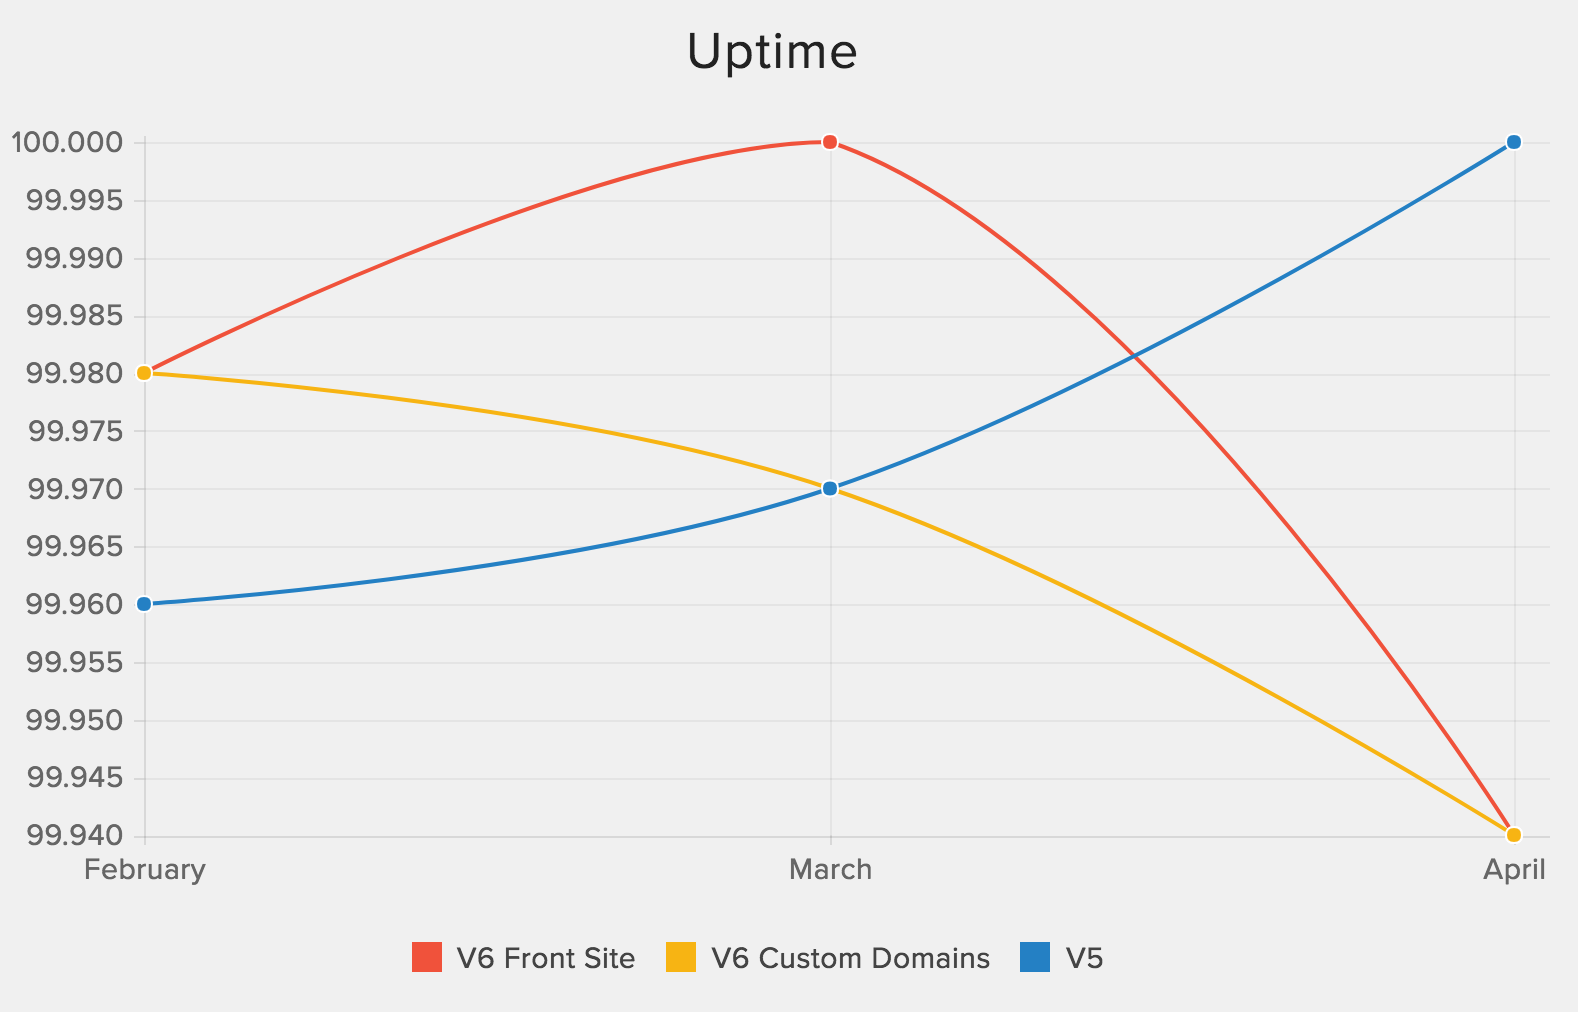 Monthly uptime metrics included in the Operational Excellence report 